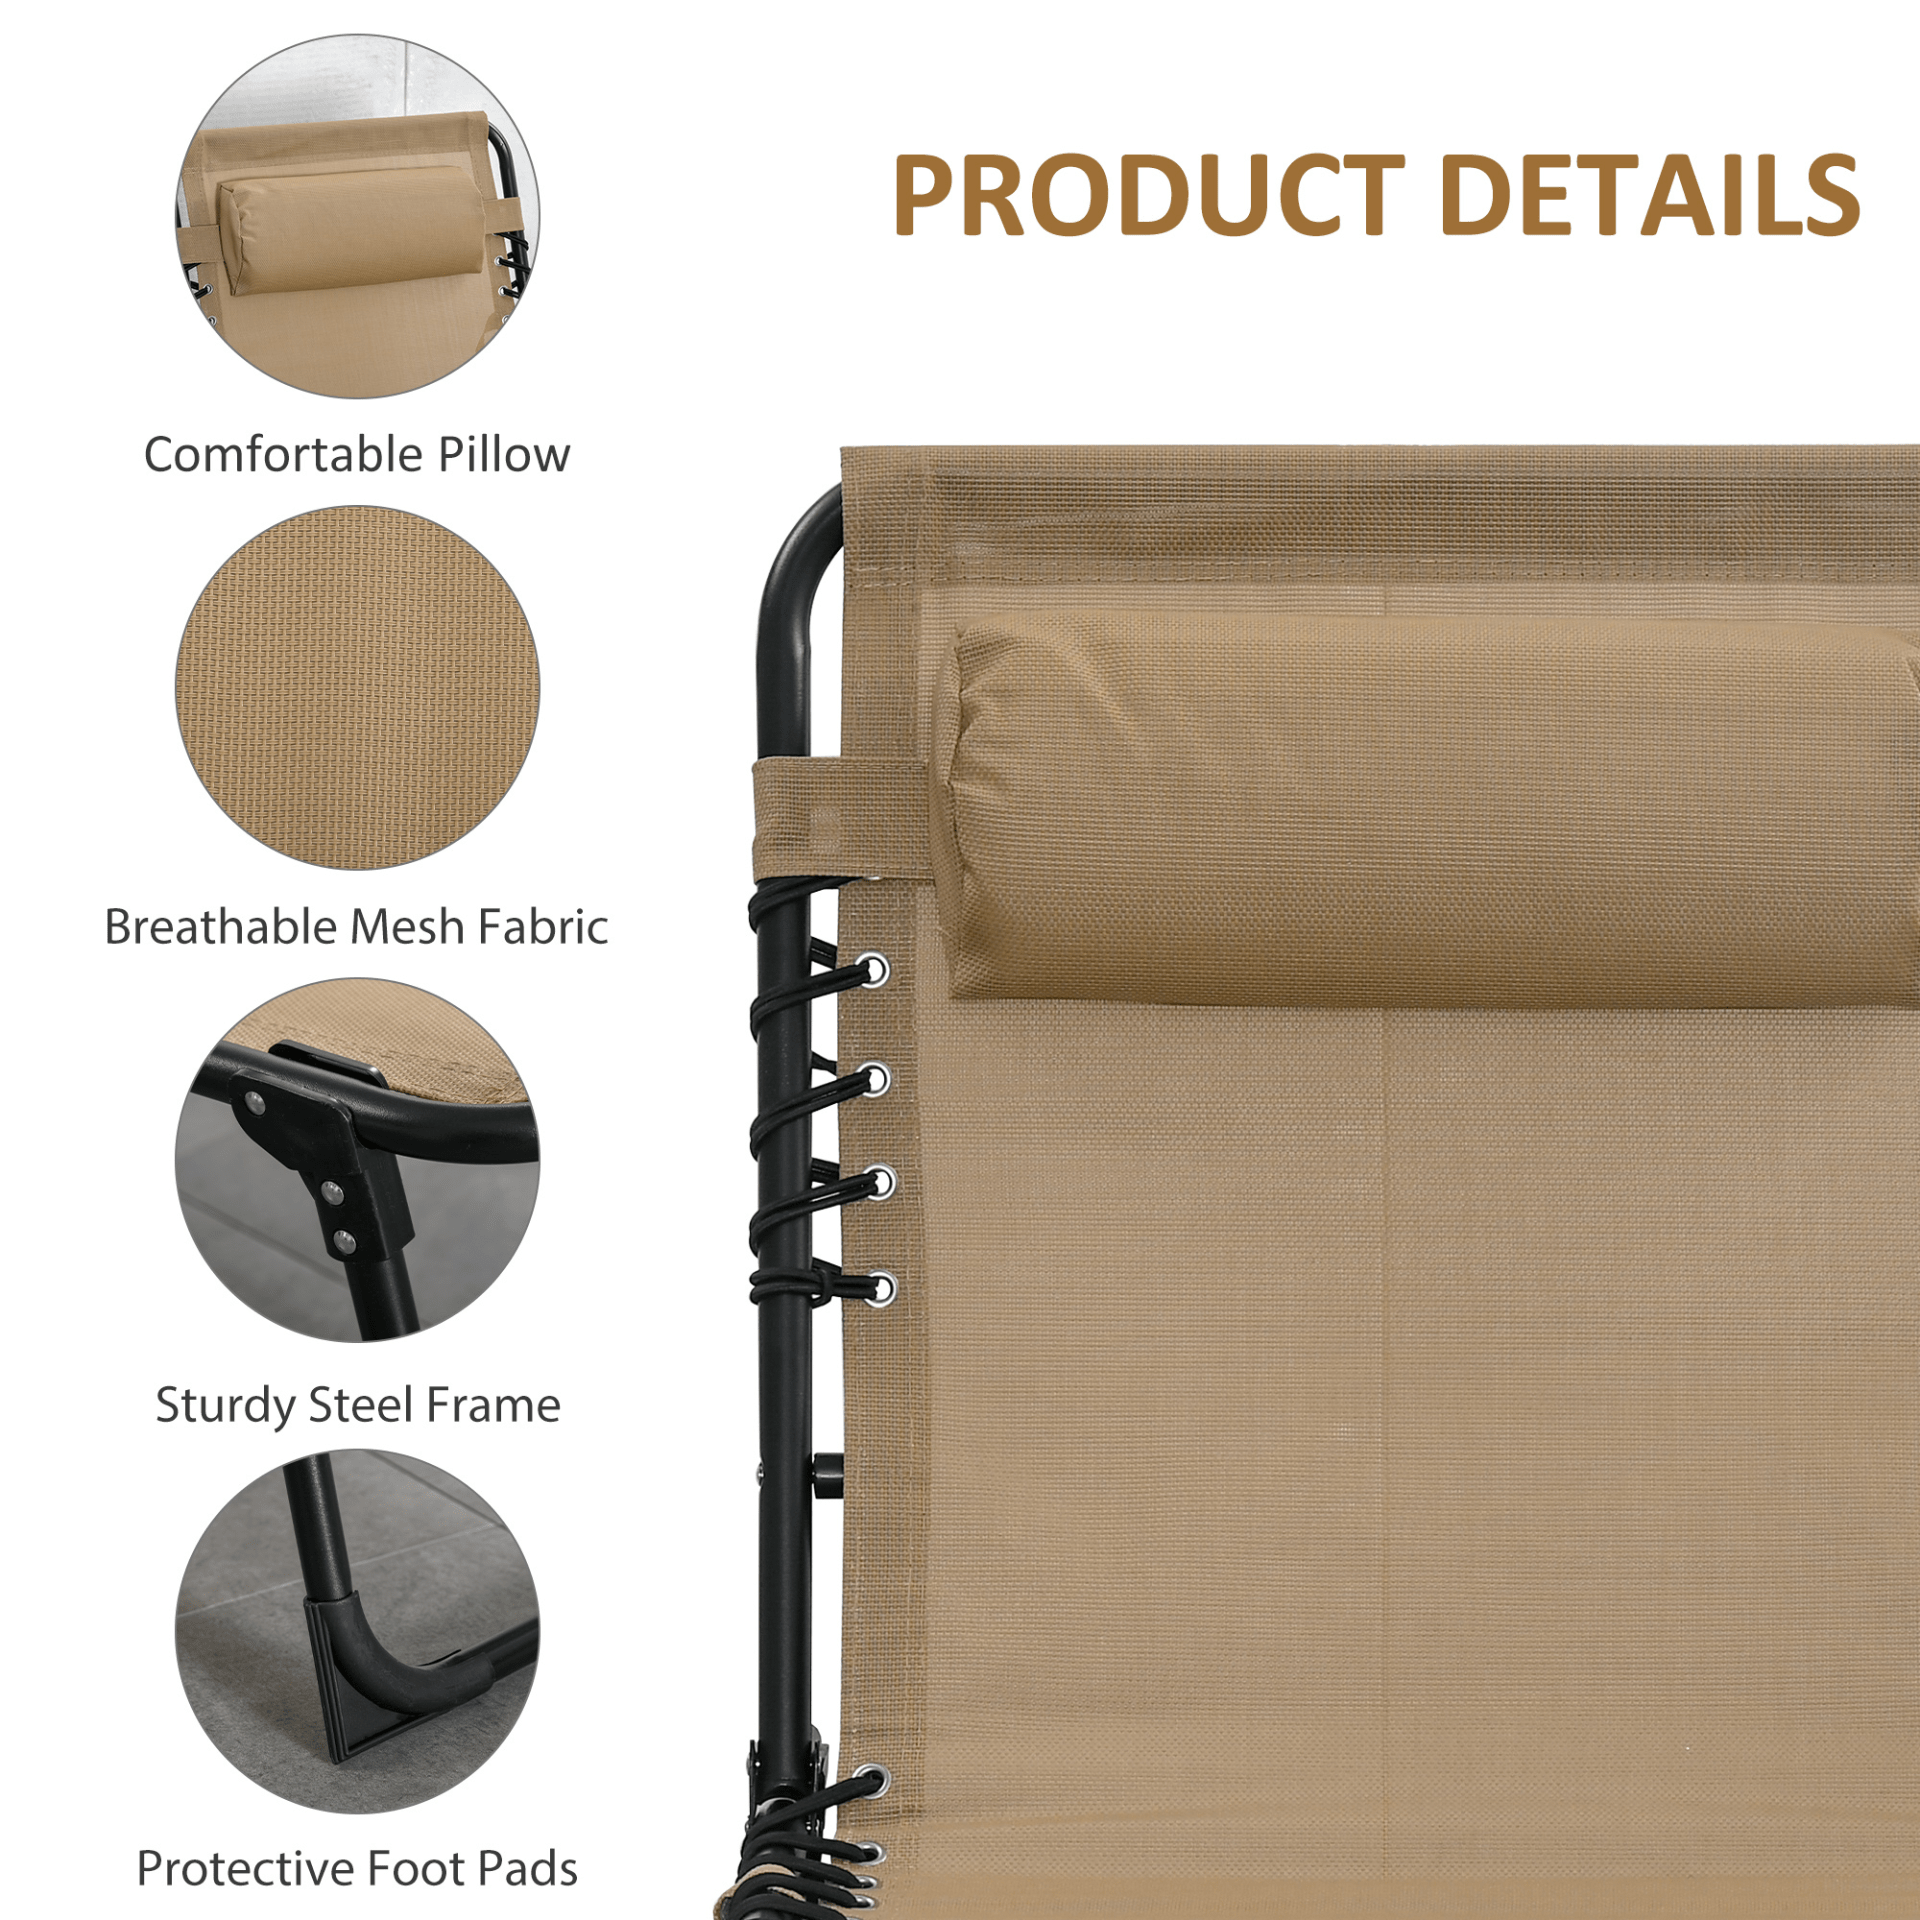 Outsunny Portable Sun Lounger, Folding Camping Bed Cot, Reclining Lounge Chair with Adjustable Backrest, Side Pocket, and Pillow - Beige Camping Chair Cosy Camping Co.   